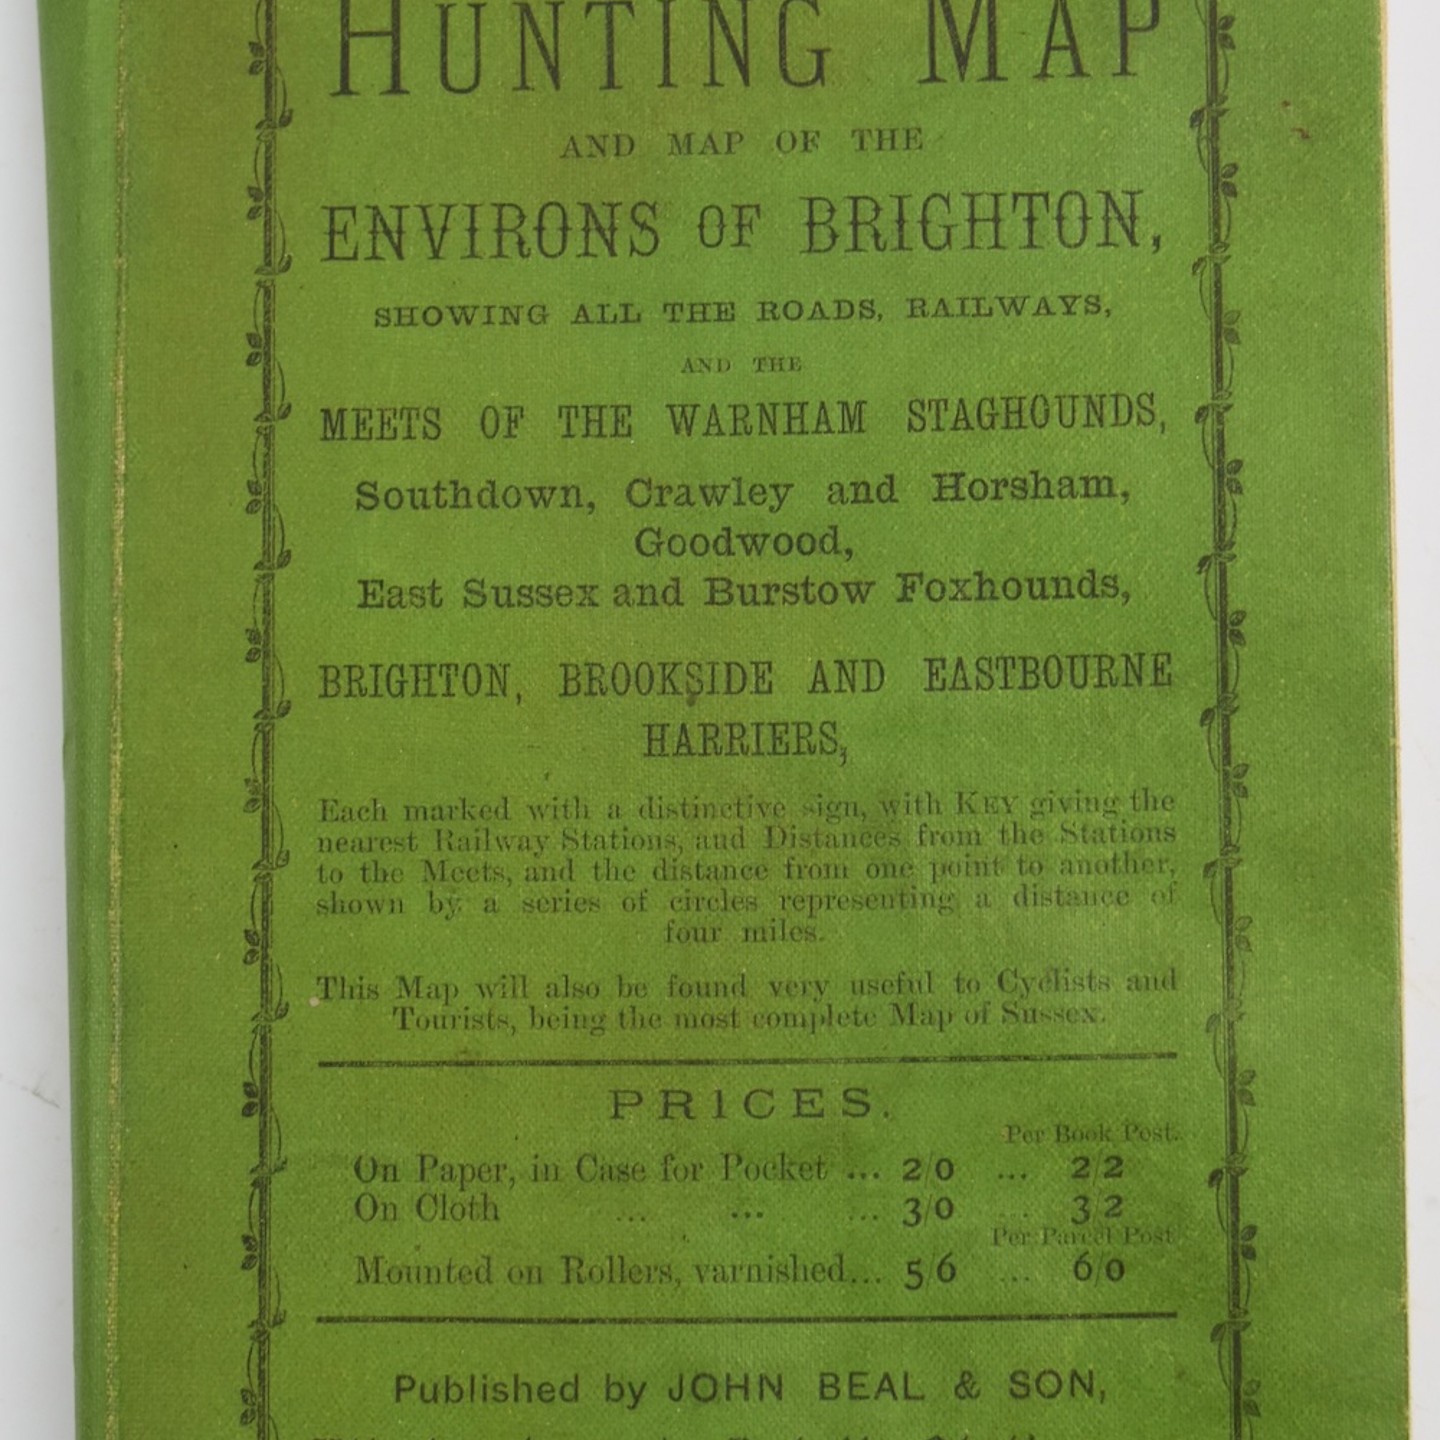 The Brighton And Sussex Hunting Map And Map Of The Environs Of Brighton, Showing All The Roads, Railways. Sold £60